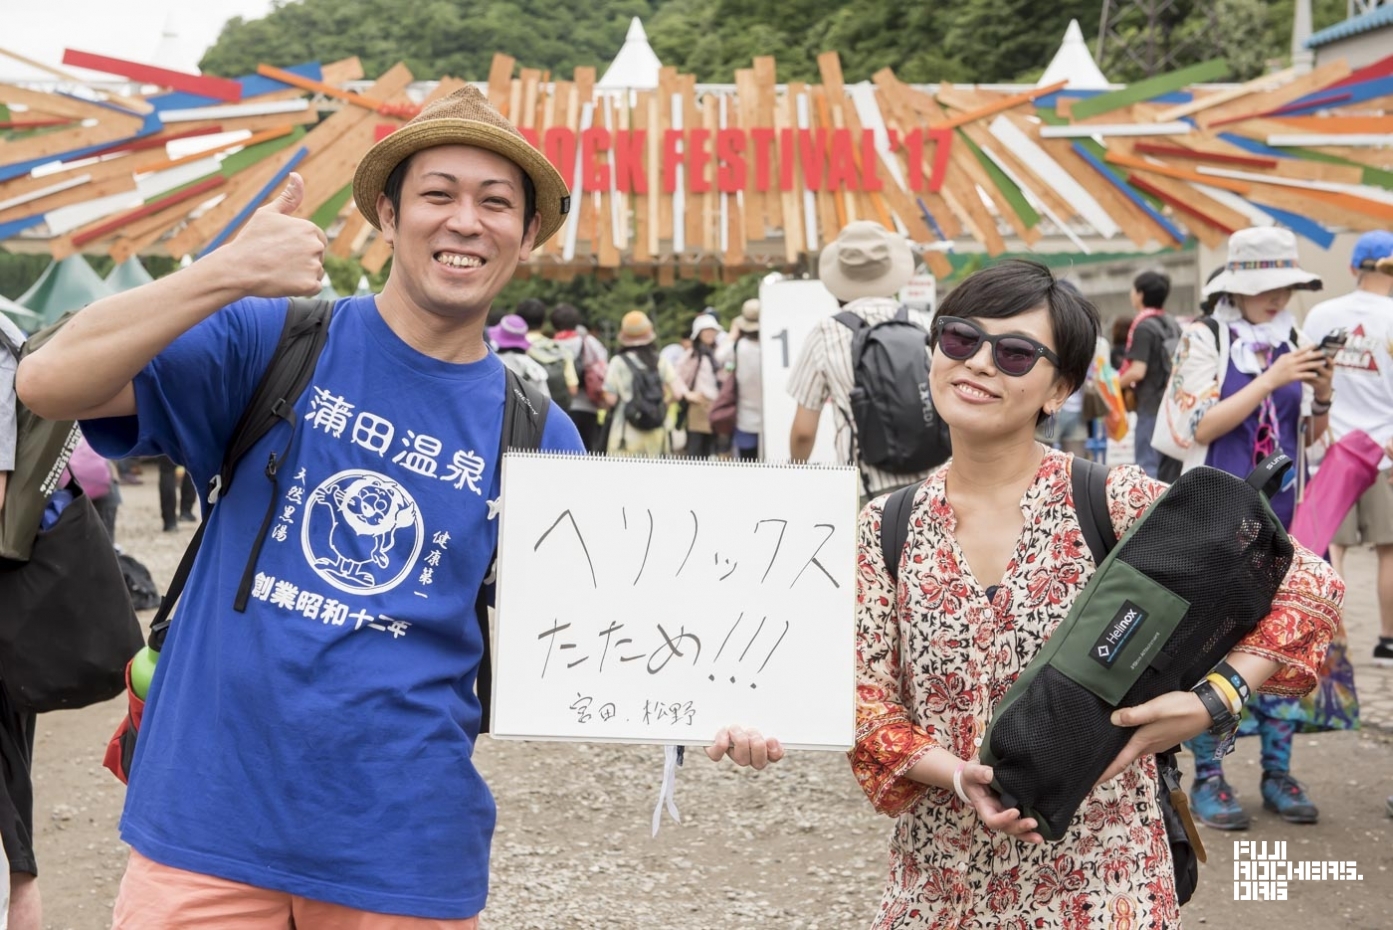 Message for Fujirock #52